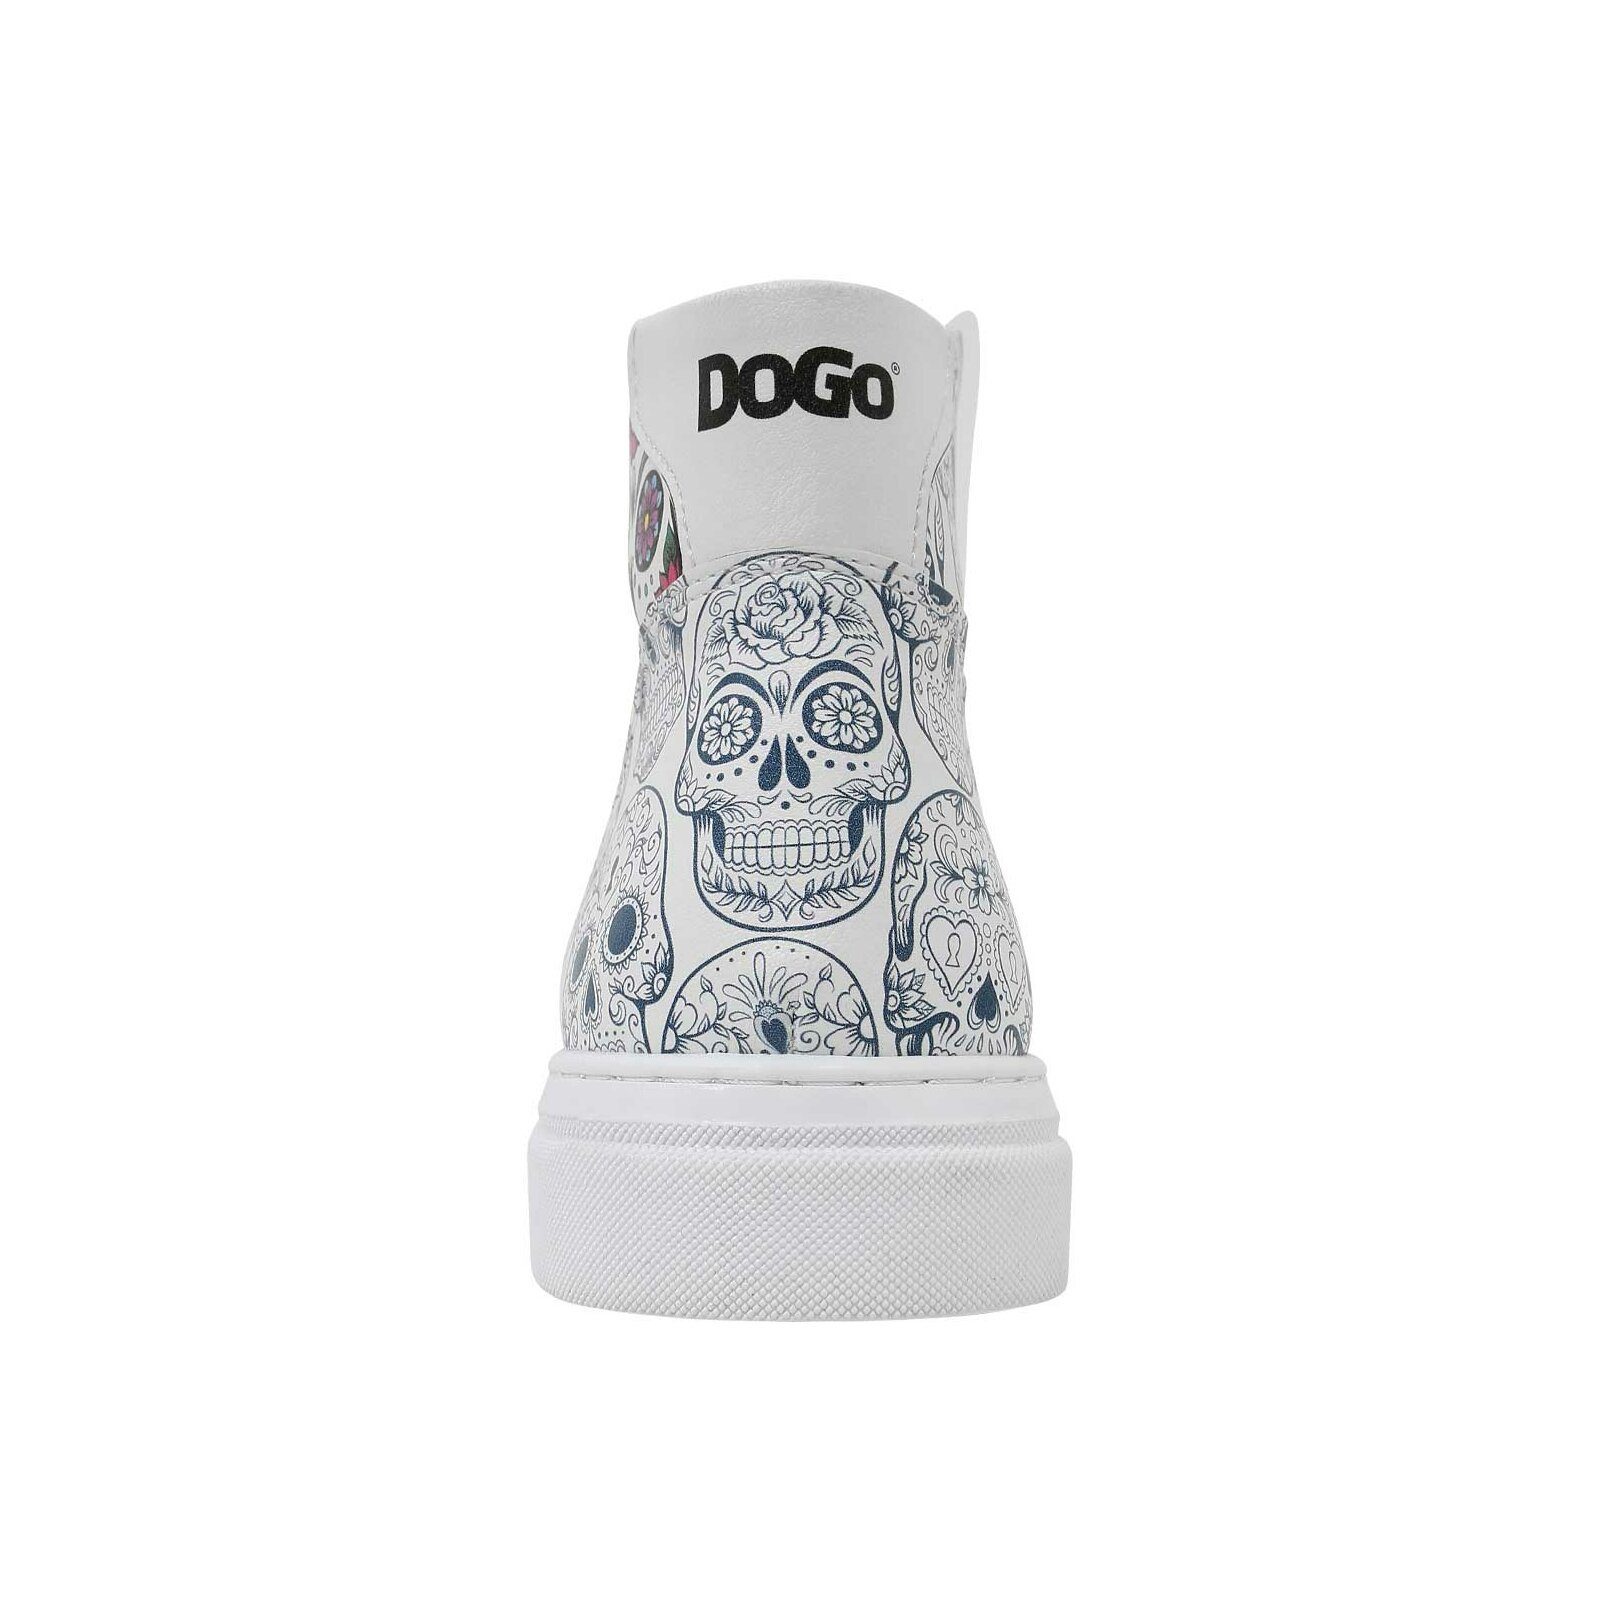 DOGO Ace Boots Stiefelette Vegan Rot